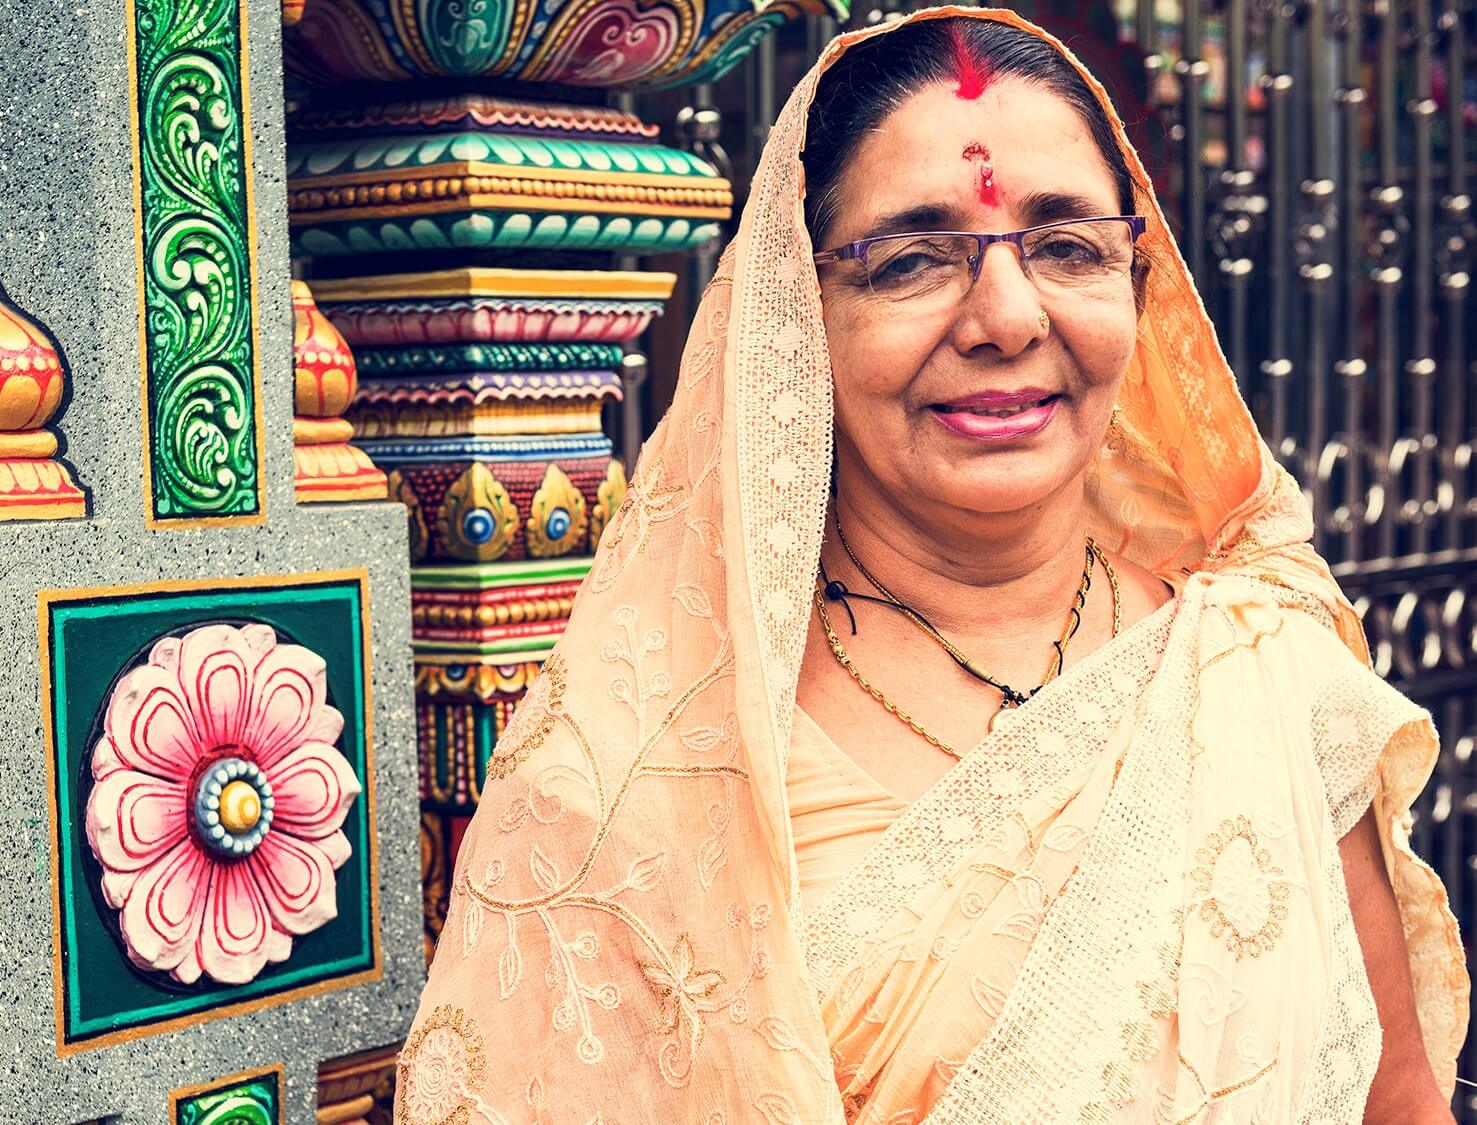 Indian woman in front of temple